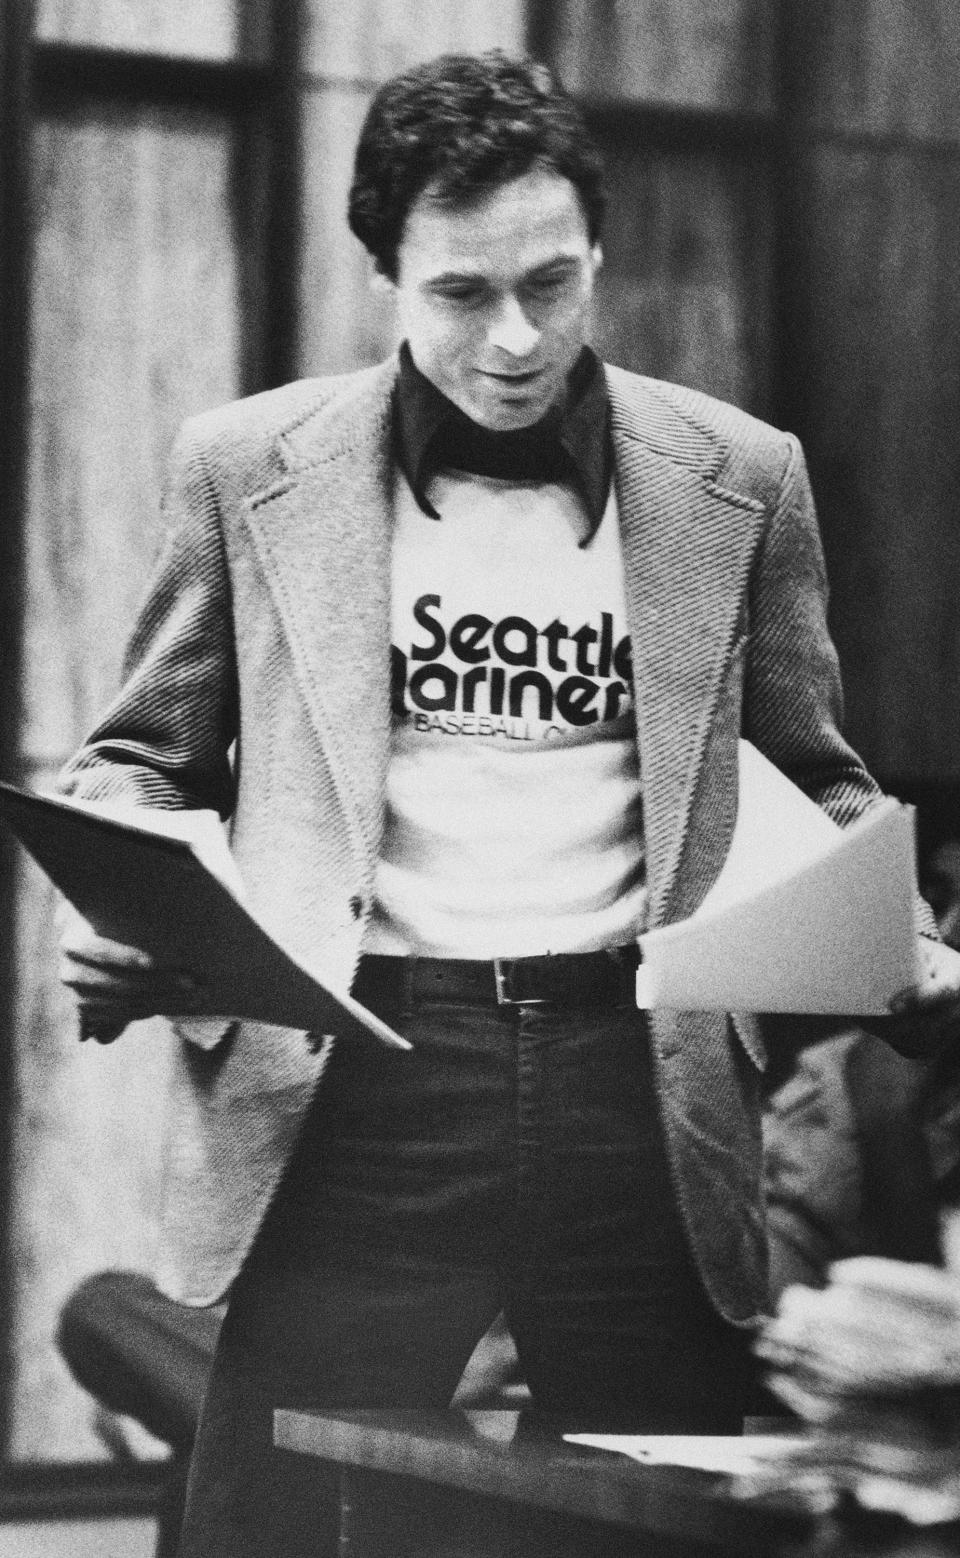 FILE - In this July 5, 1979 file photo, accused serial killer Ted Bundy wears a Seattle Mariners T-shirt in court in Miami, as he presents is own motions and made a request for a typewriter in his Dade County jail cell. The judge denied Bundy's request saying that Bundy's handwriting is perfectly legible. The defendant is acting as his own attorney although there are others on his defense team. (AP Photo)